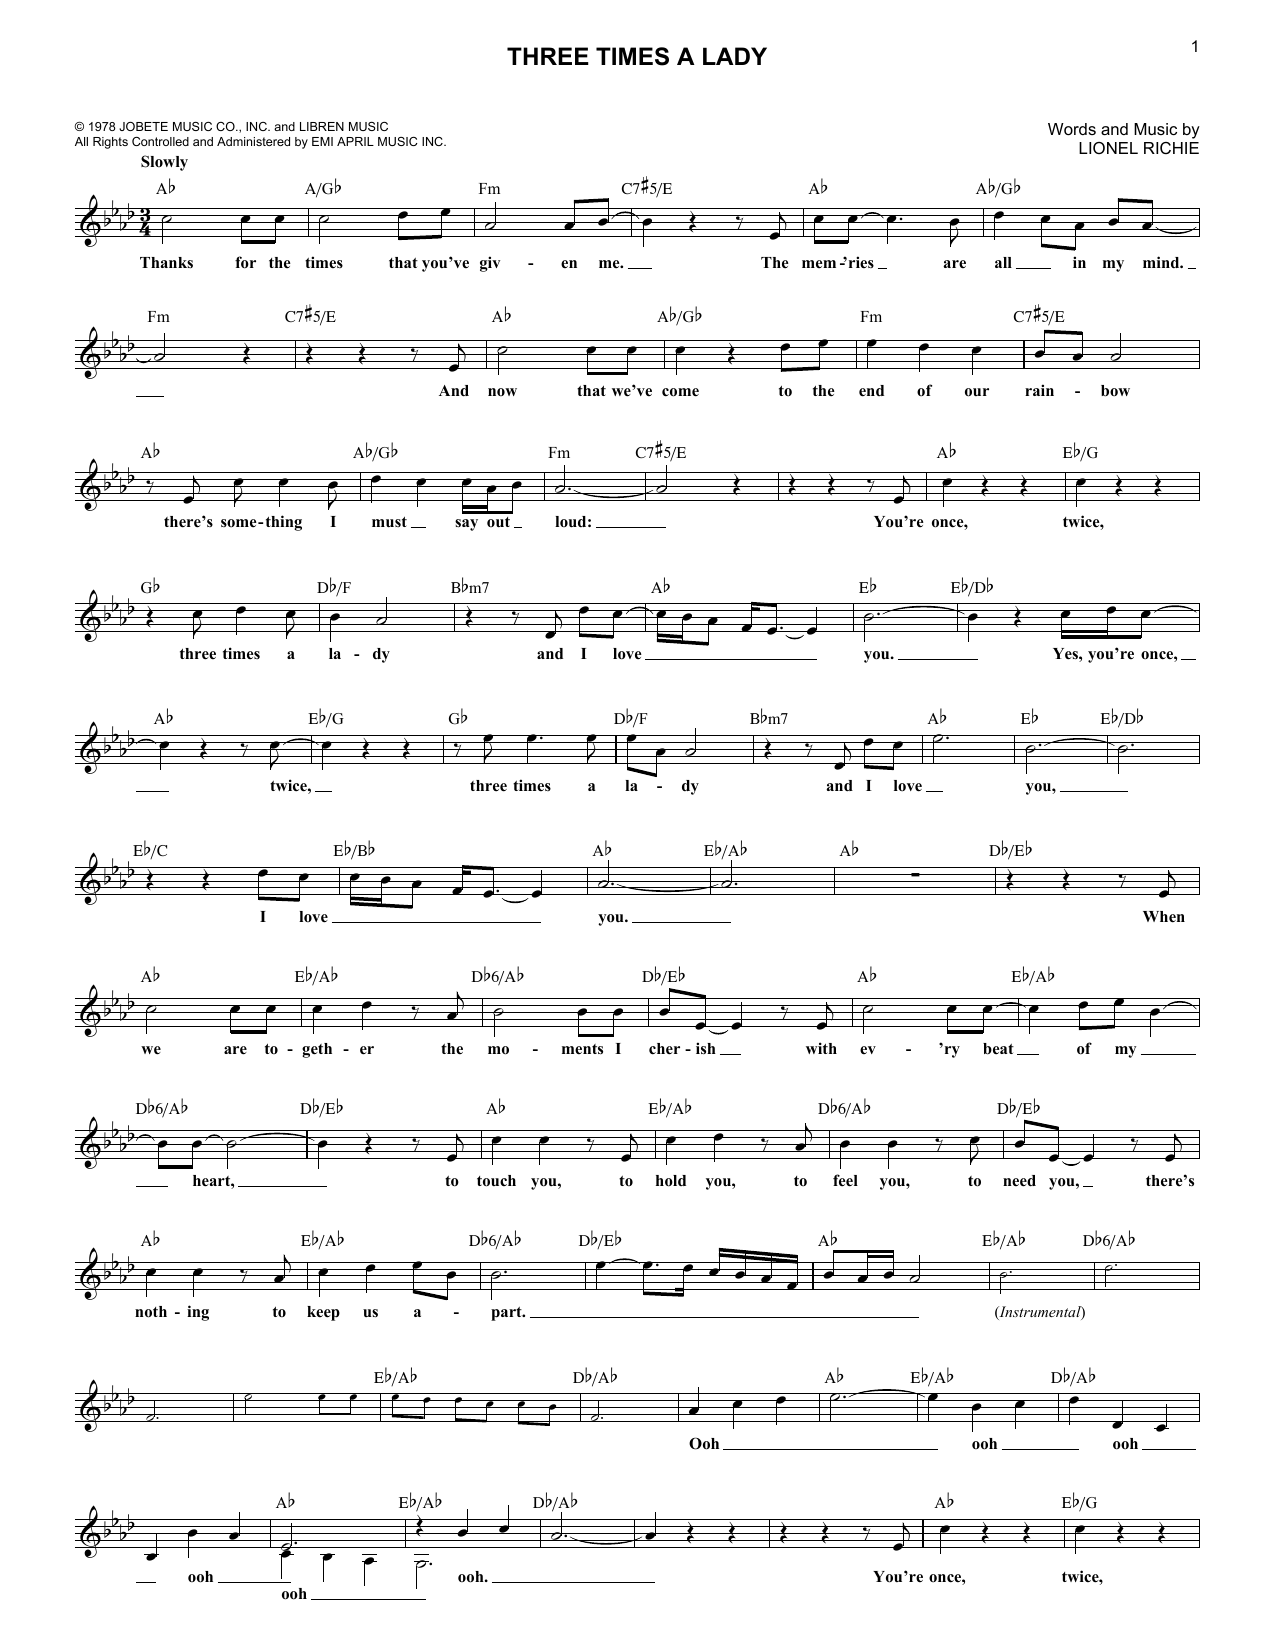 Download The Commodores Three Times A Lady Sheet Music